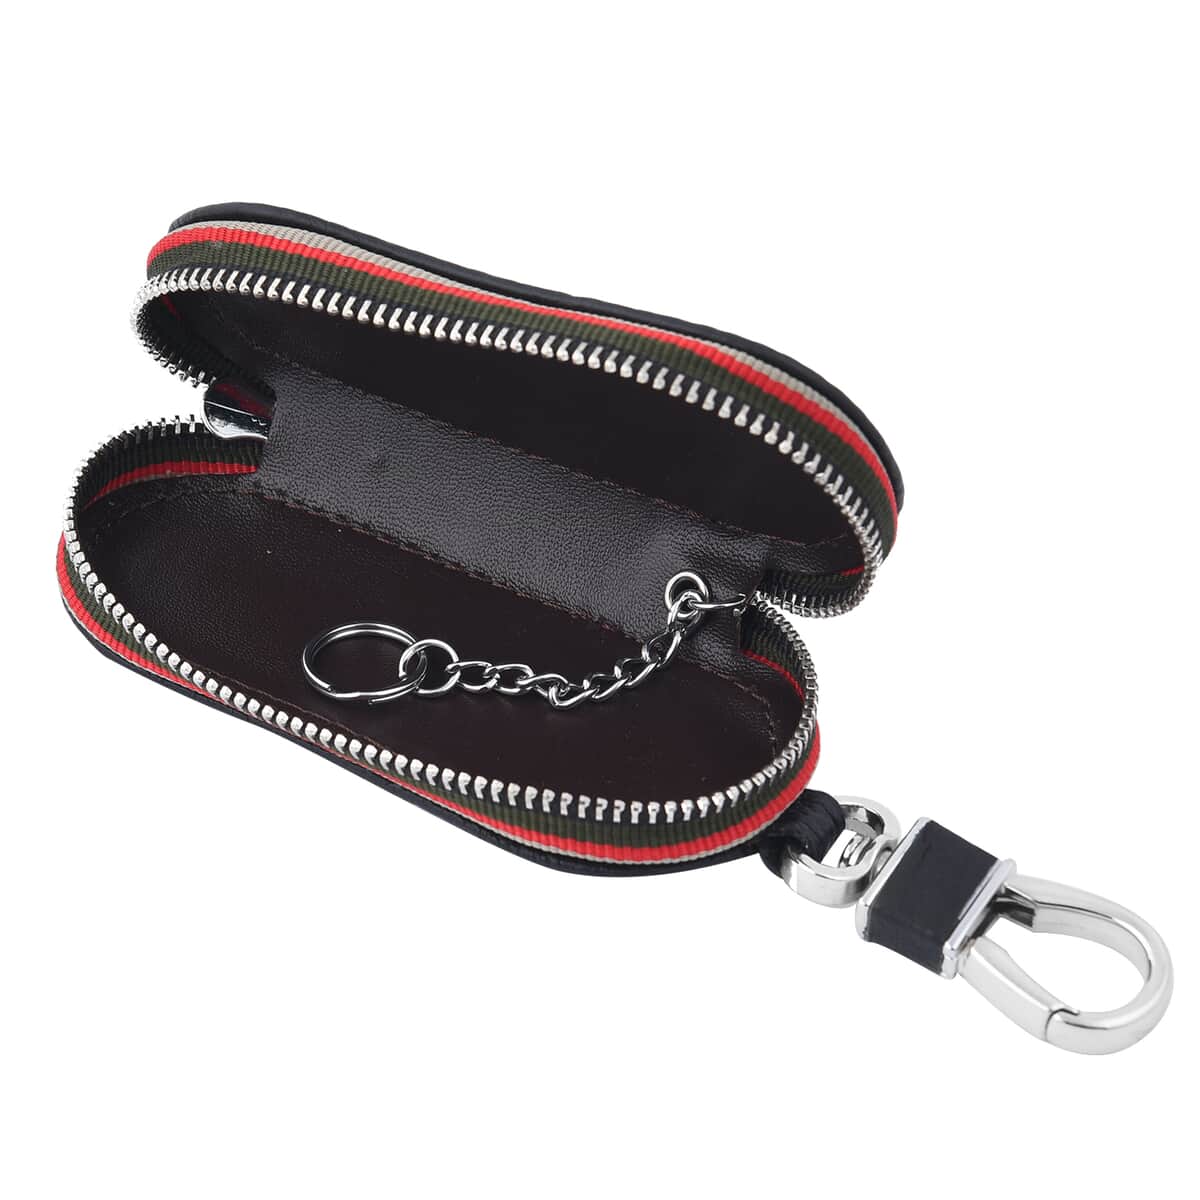 Black Elliptical-Shaped Genuine Leather Bag With Swivel Metallic Snap Hoop Zipper Closure and Key-ring For Car Keys Remote image number 3